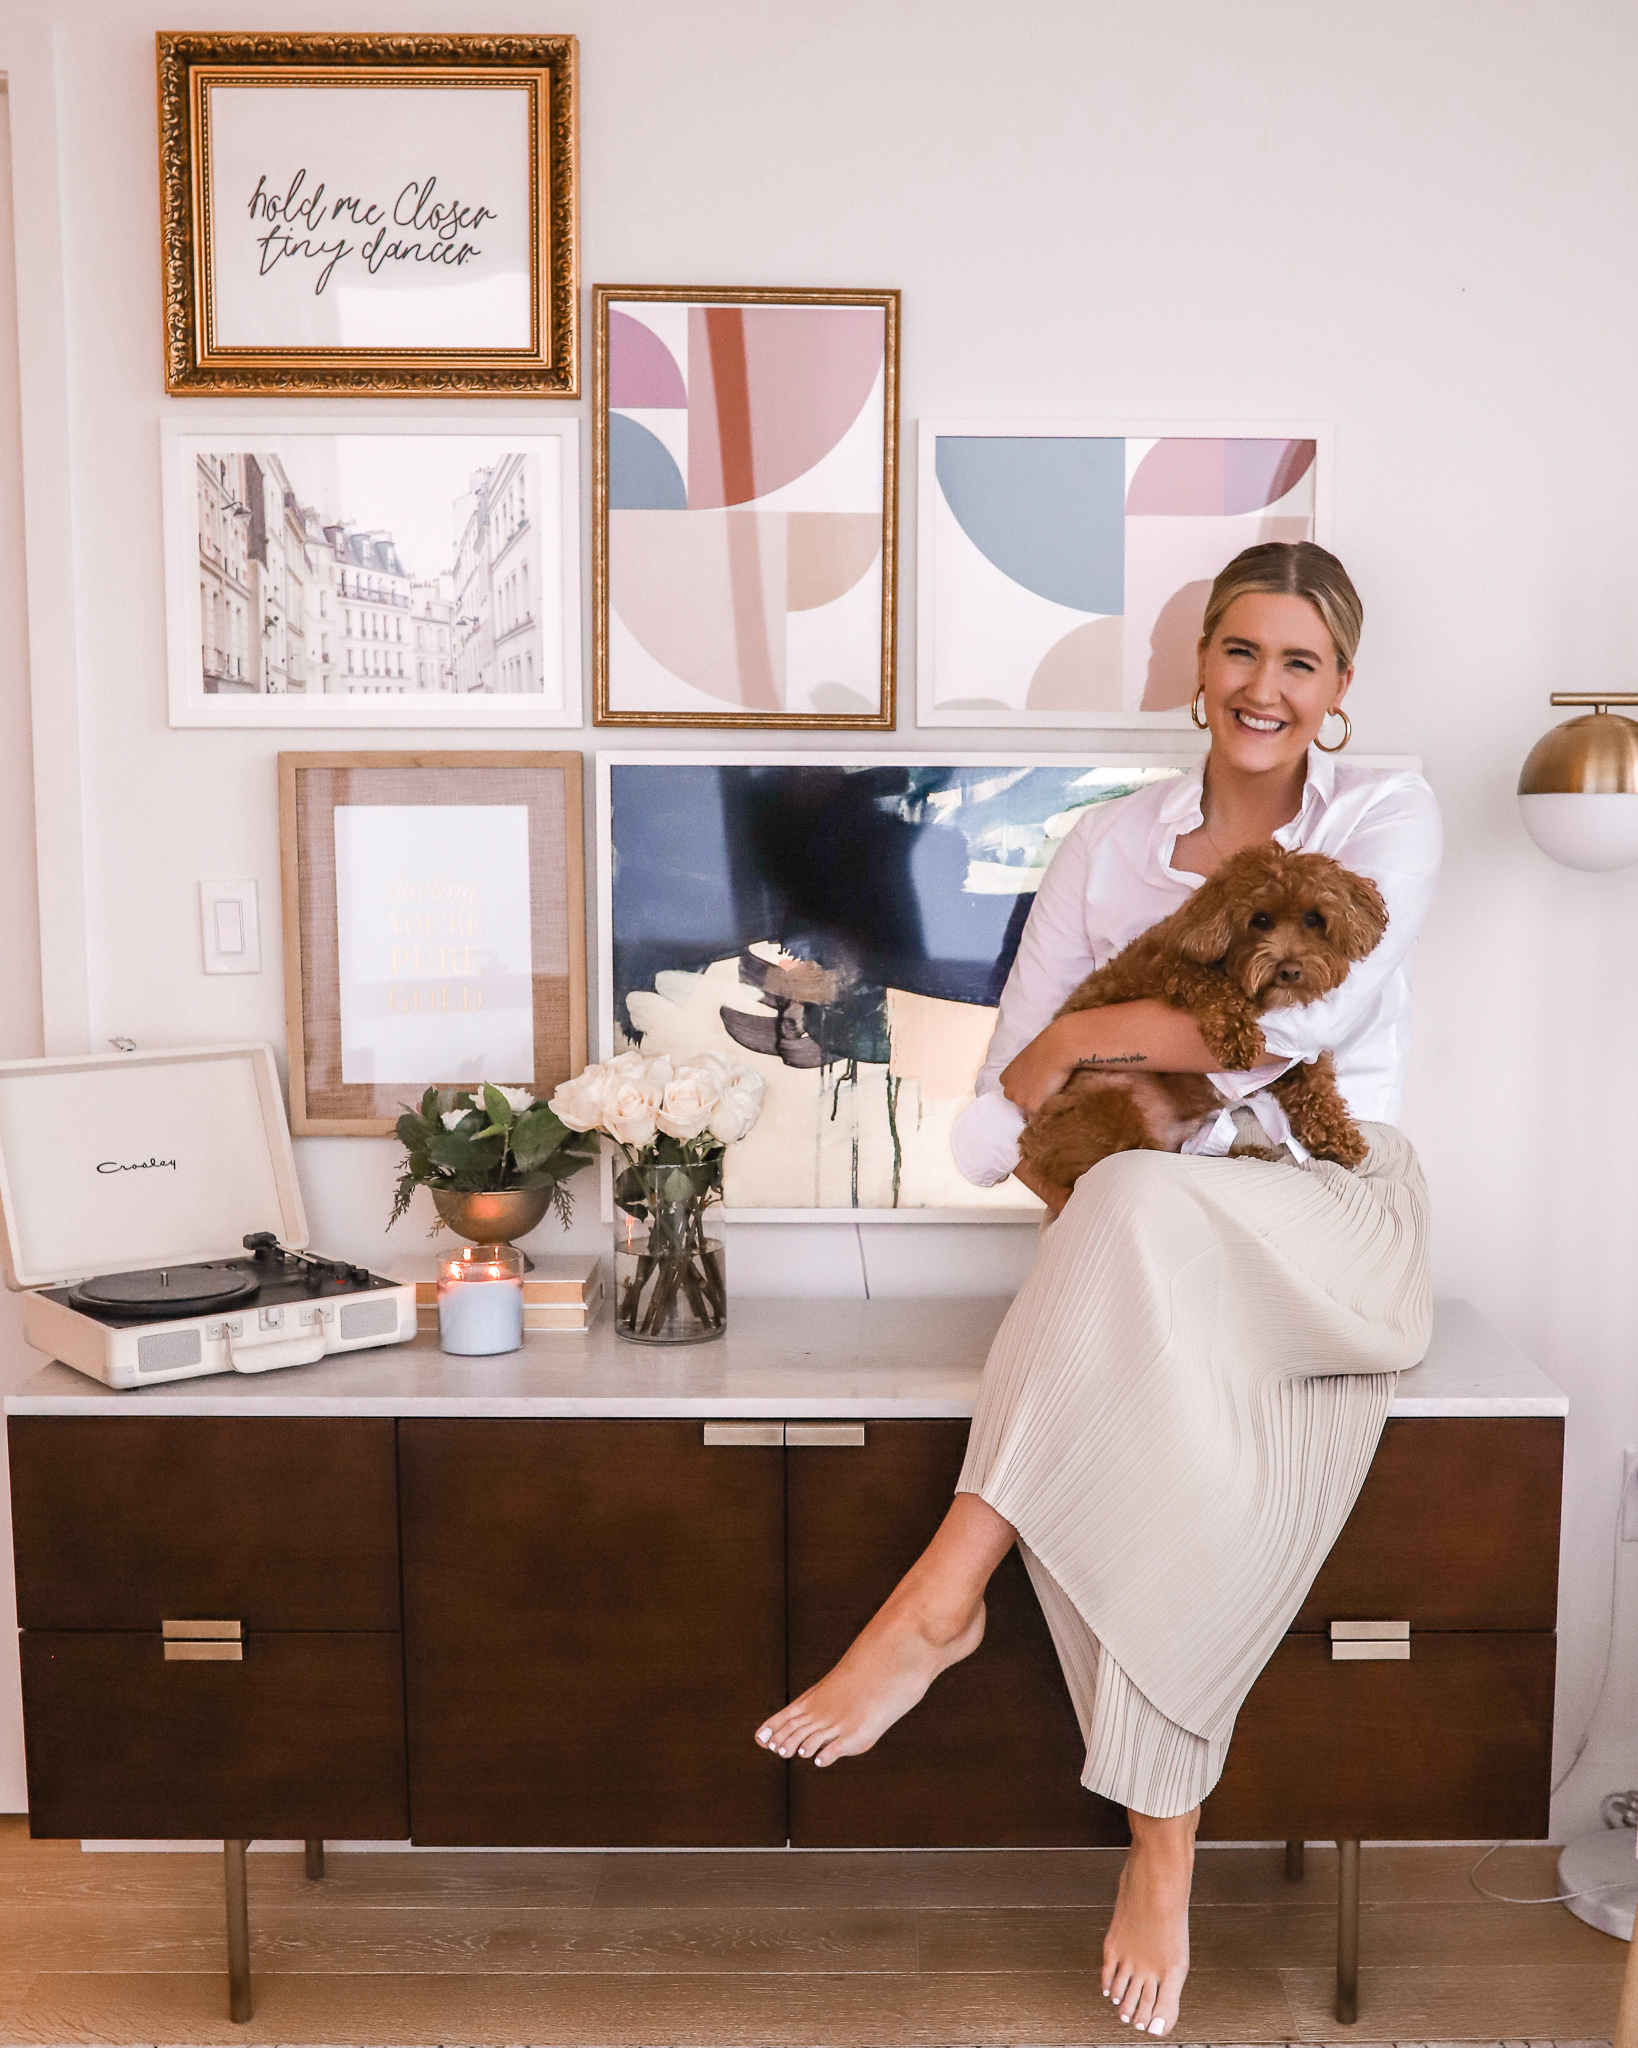 Anna's apartment with her standing in front of her gallery wall with her dog, Banks.